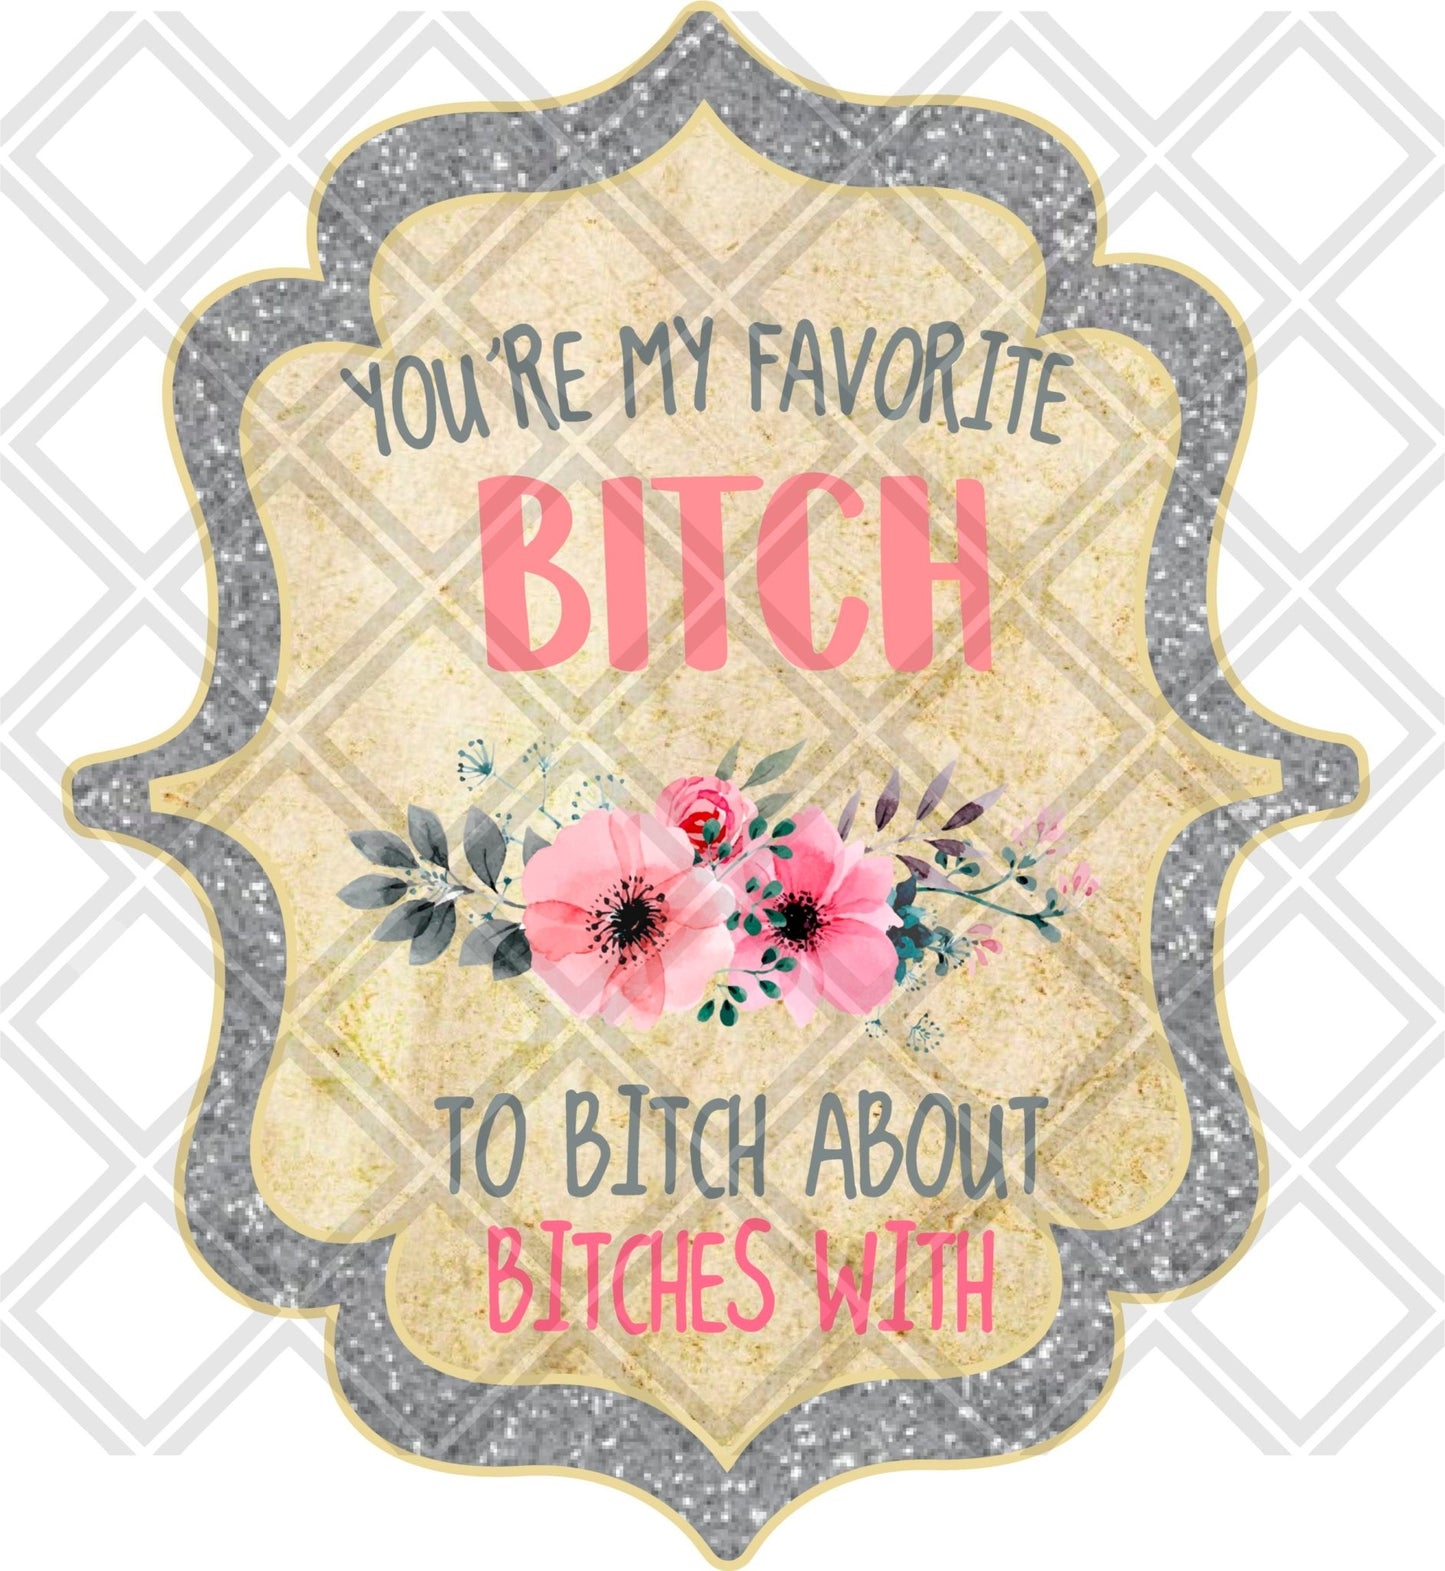 Youre my favorite bitch to bitch about bitches with png Digital Download Instand Download - Do it yourself Transfers